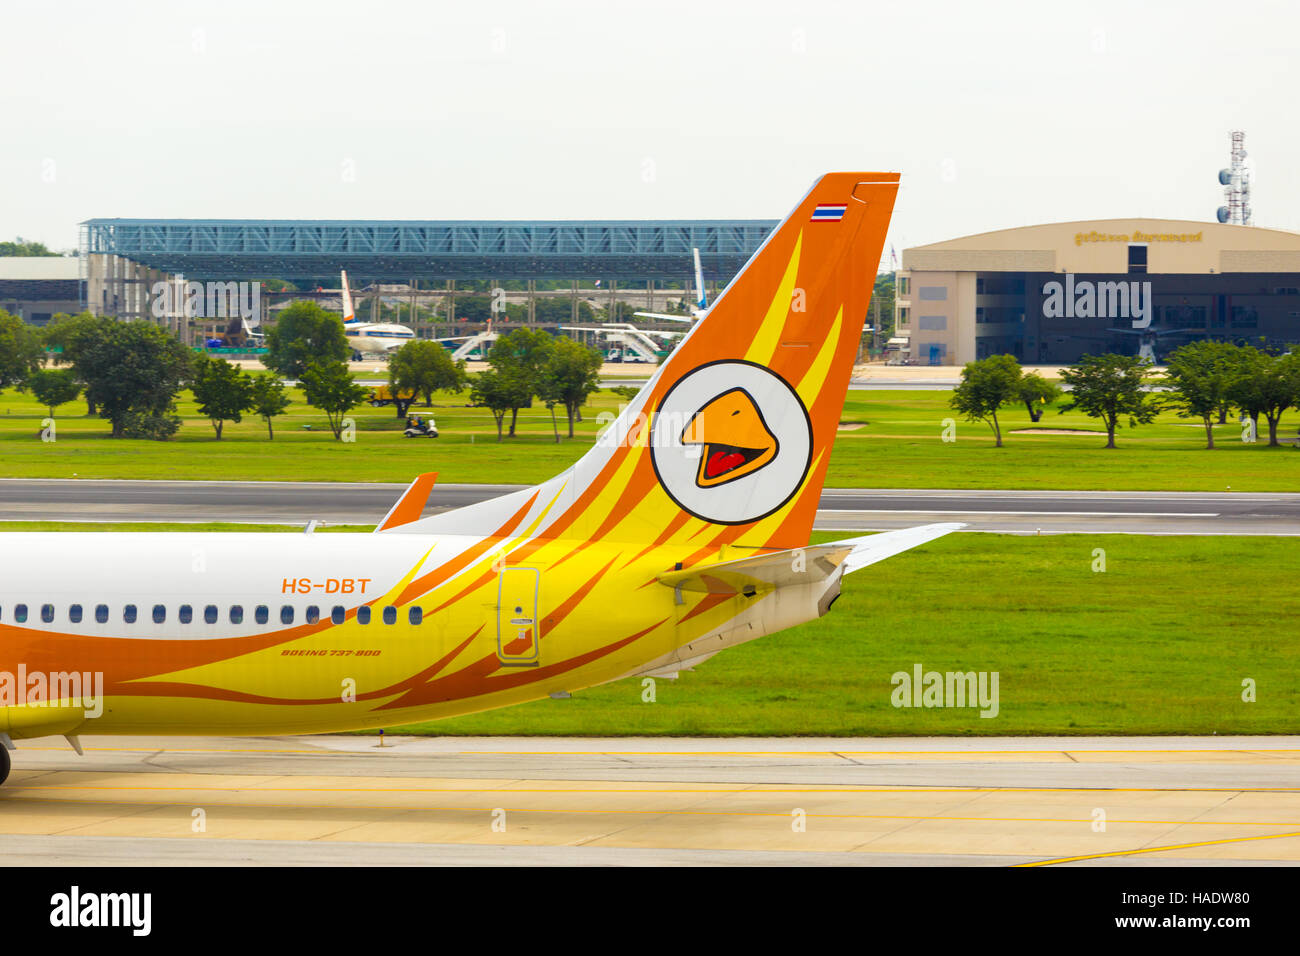 Golf course and golfers in cart visible behind the tail section and logo of low cost carrier, Nok Air airplane taxiing on runway Stock Photo